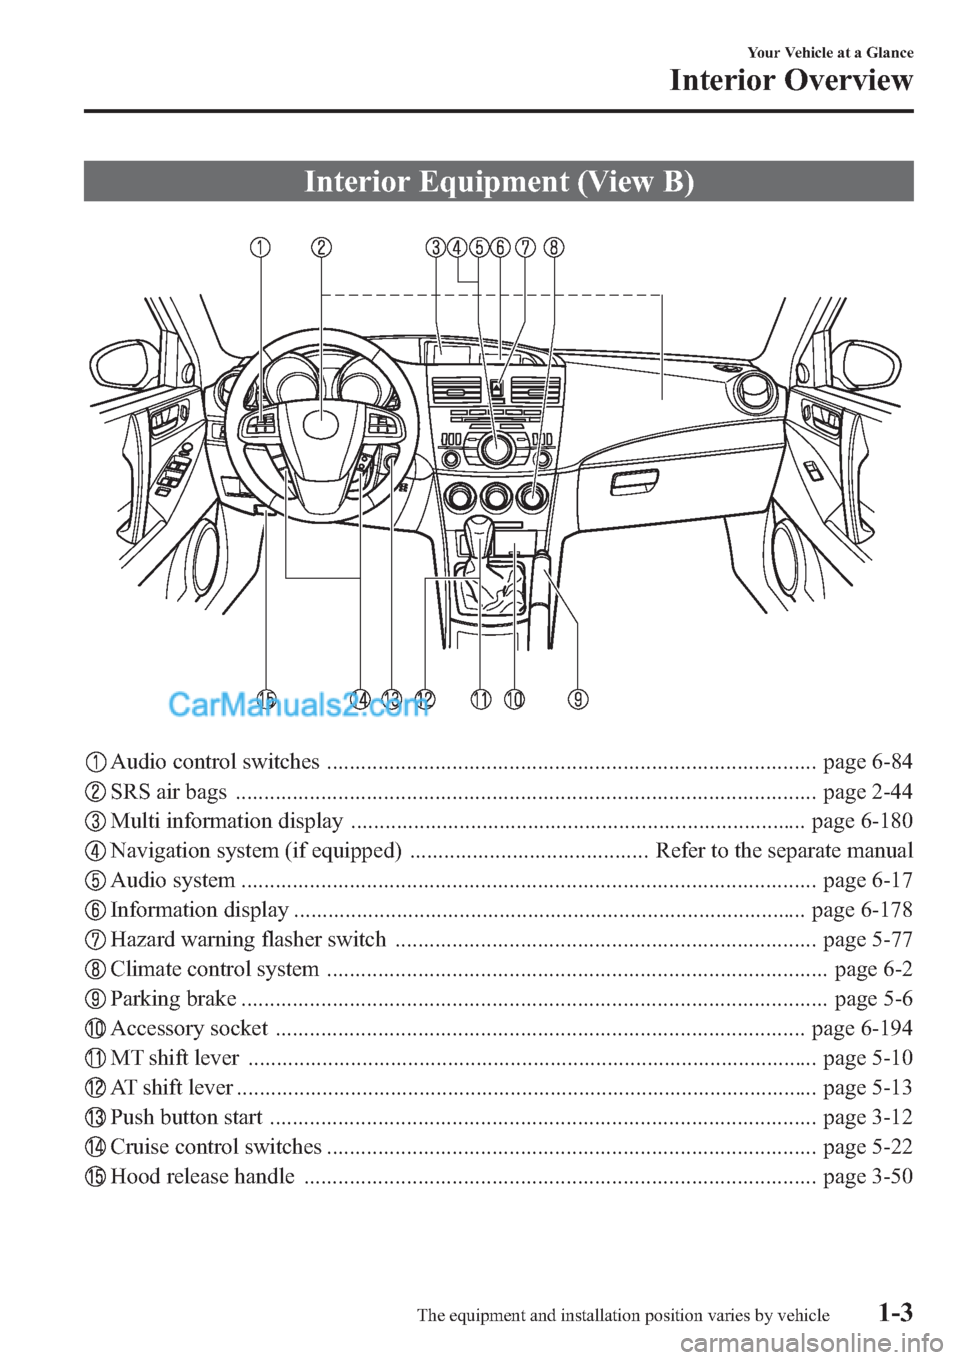 MAZDA MODEL MAZDASPEED 3 2013  Owners Manual (in English) Interior Equipment (View B)
Audio control switches ...................................................................................... page 6-84
SRS air bags .......................................